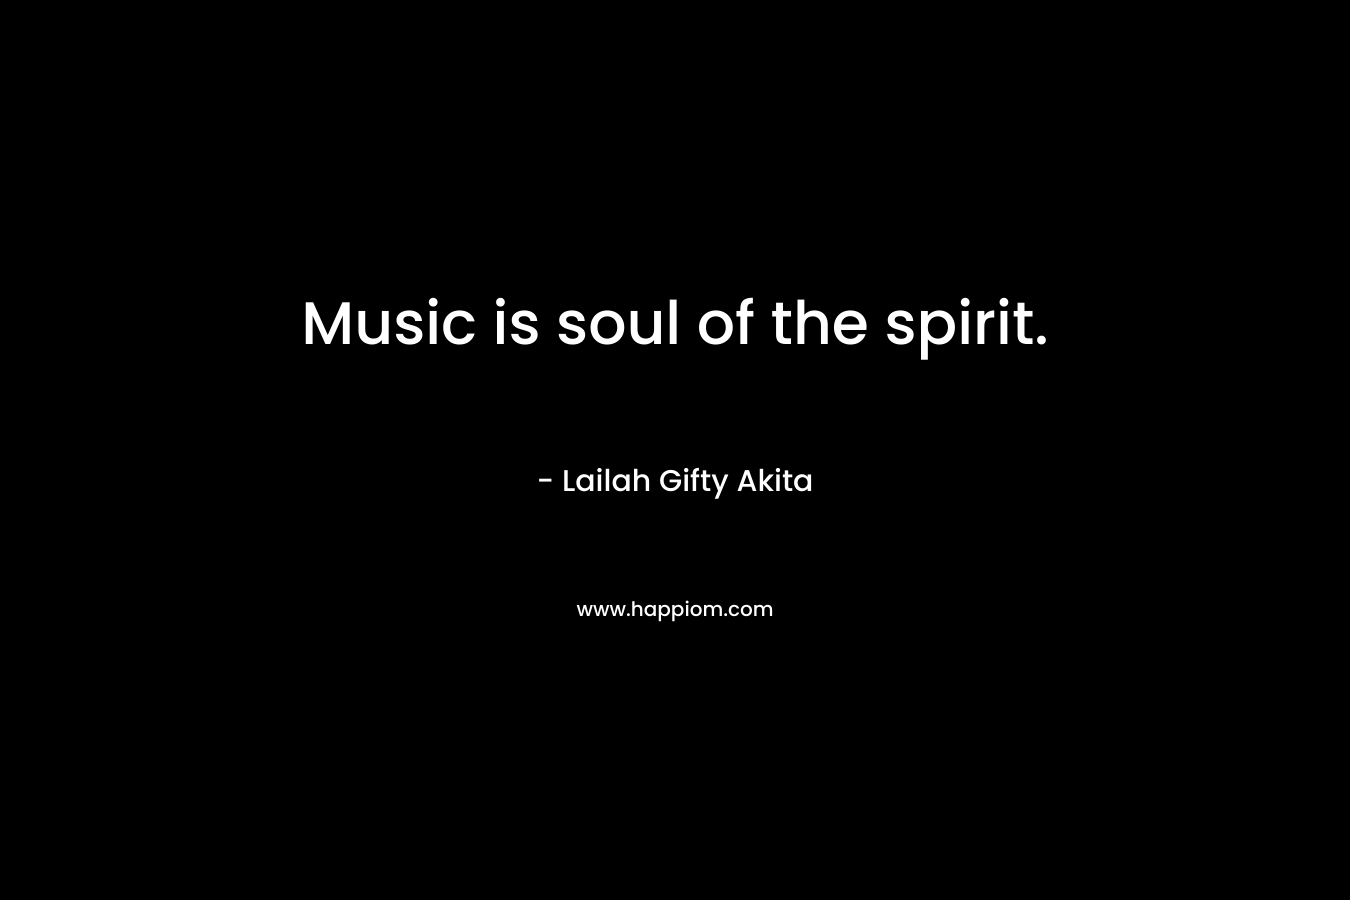 Music is soul of the spirit.